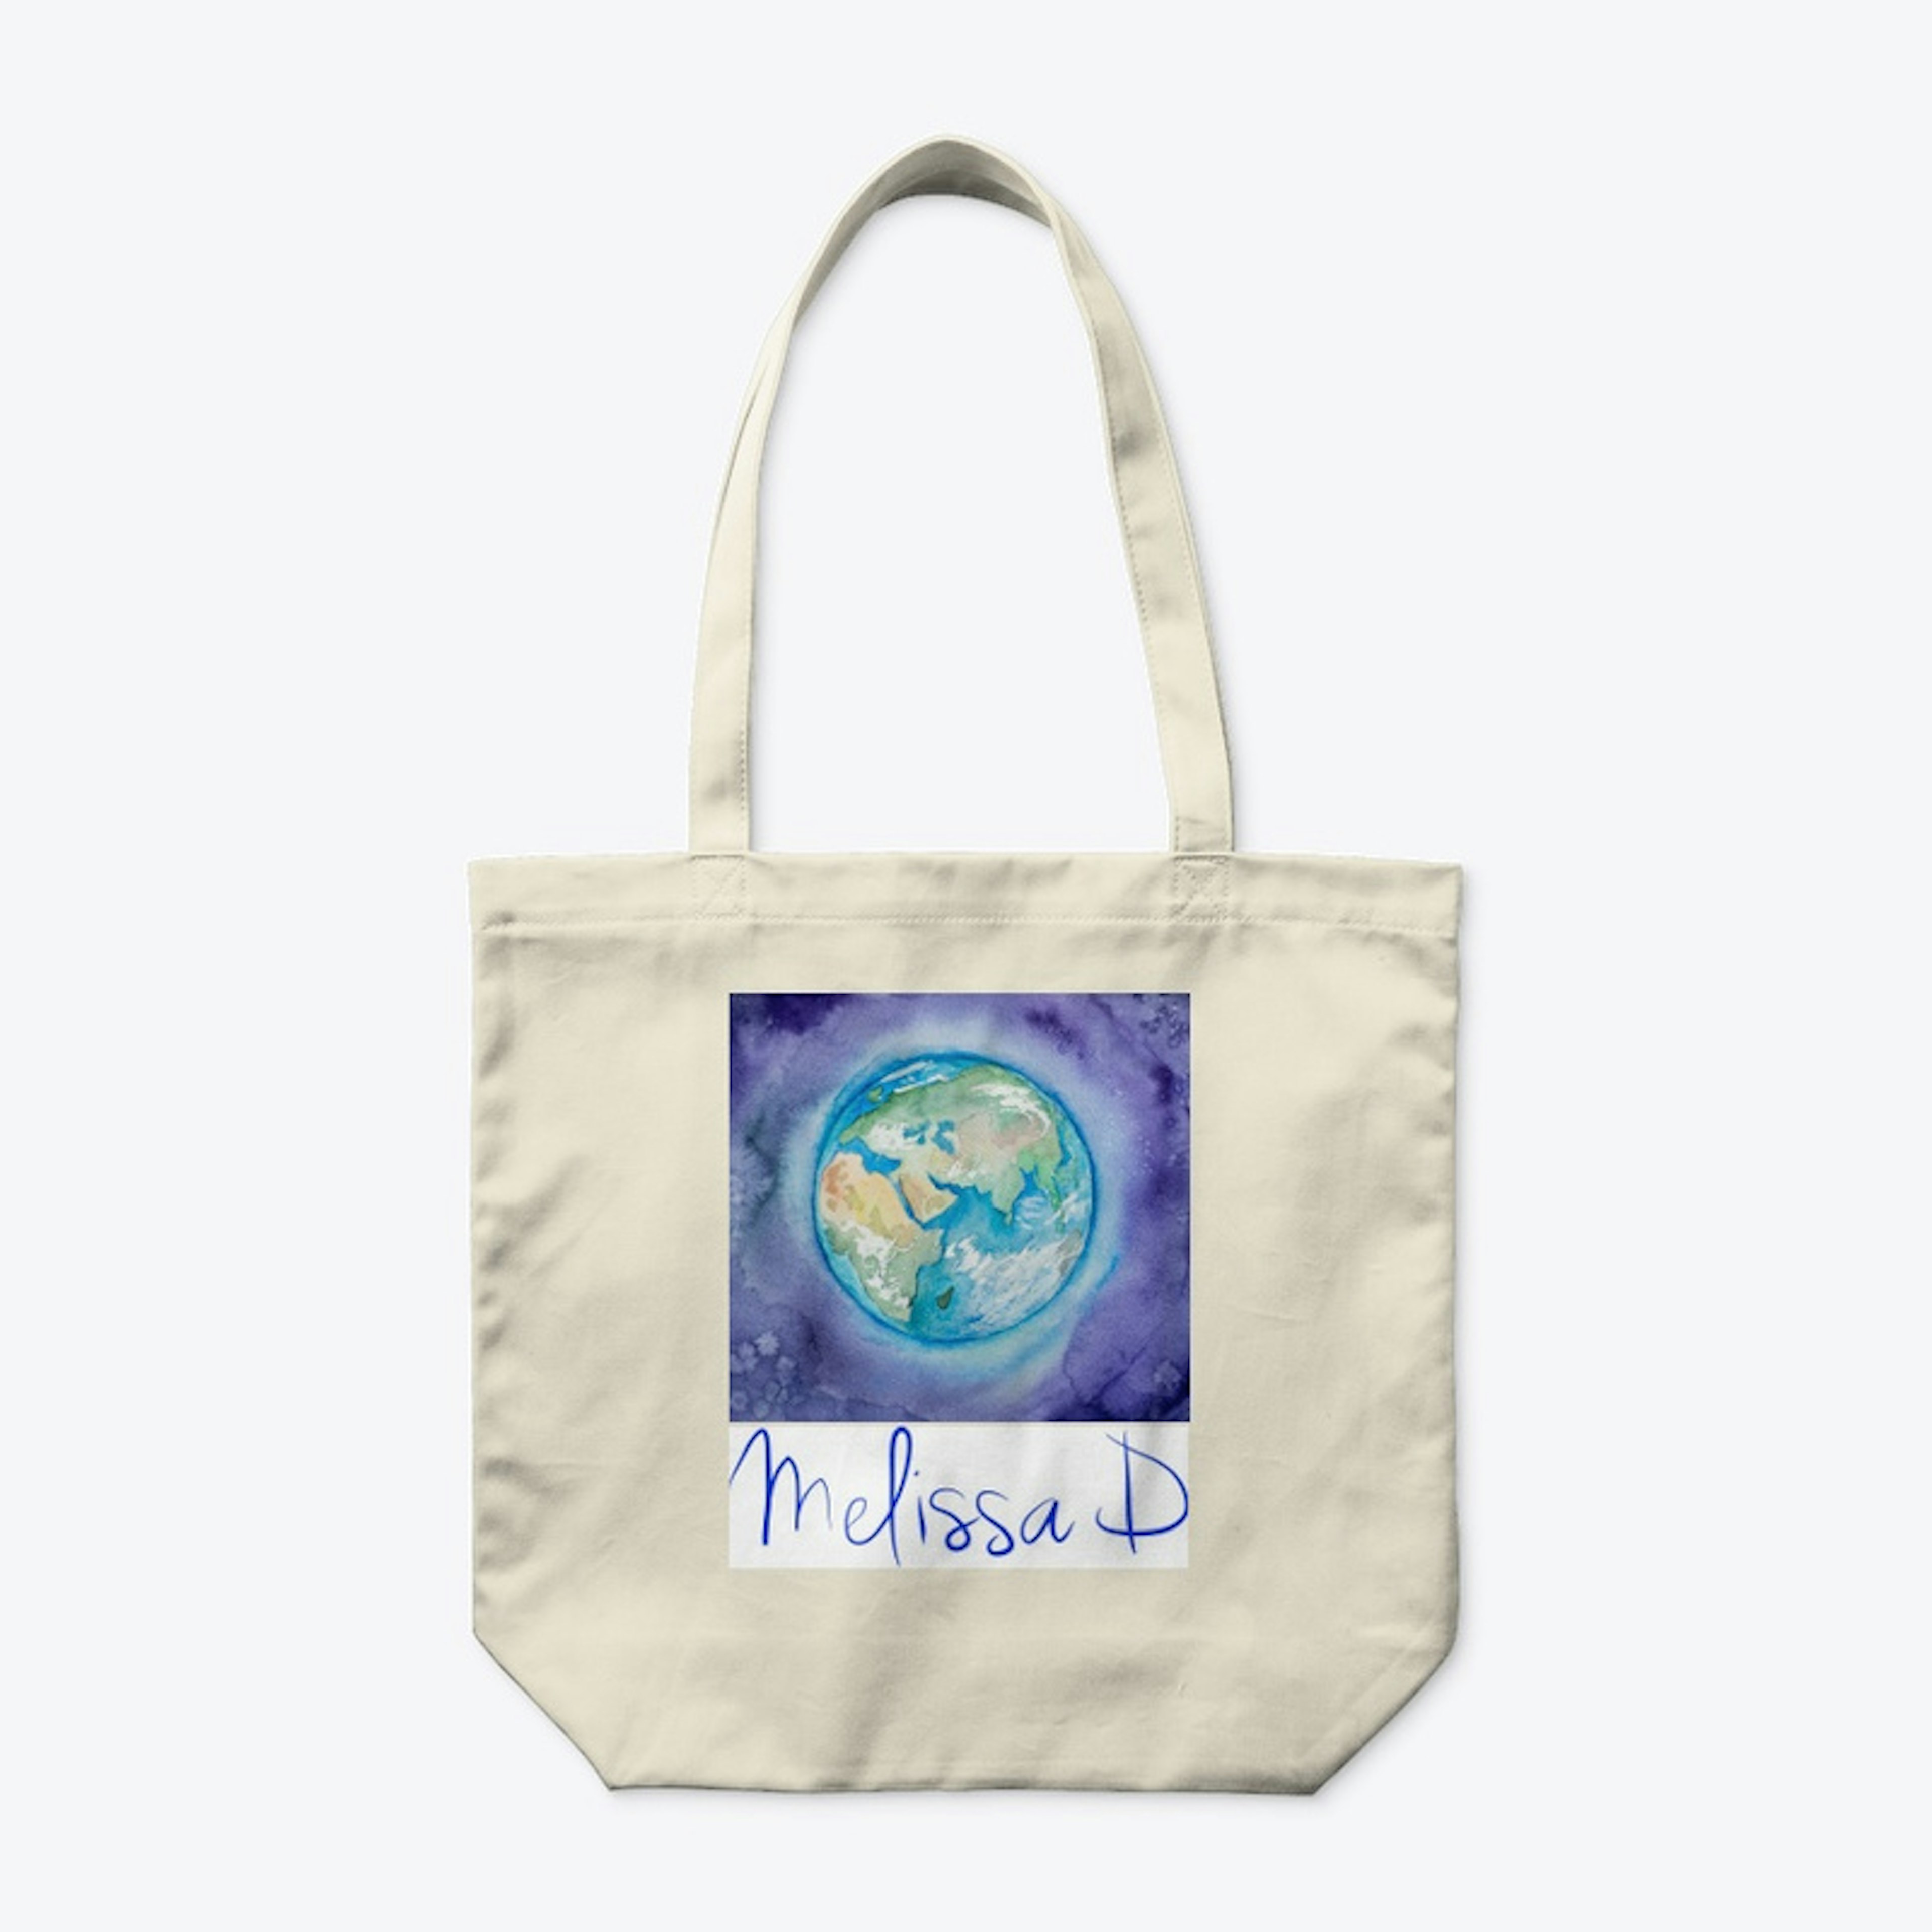 Melissa D's Earth Merch Collection 